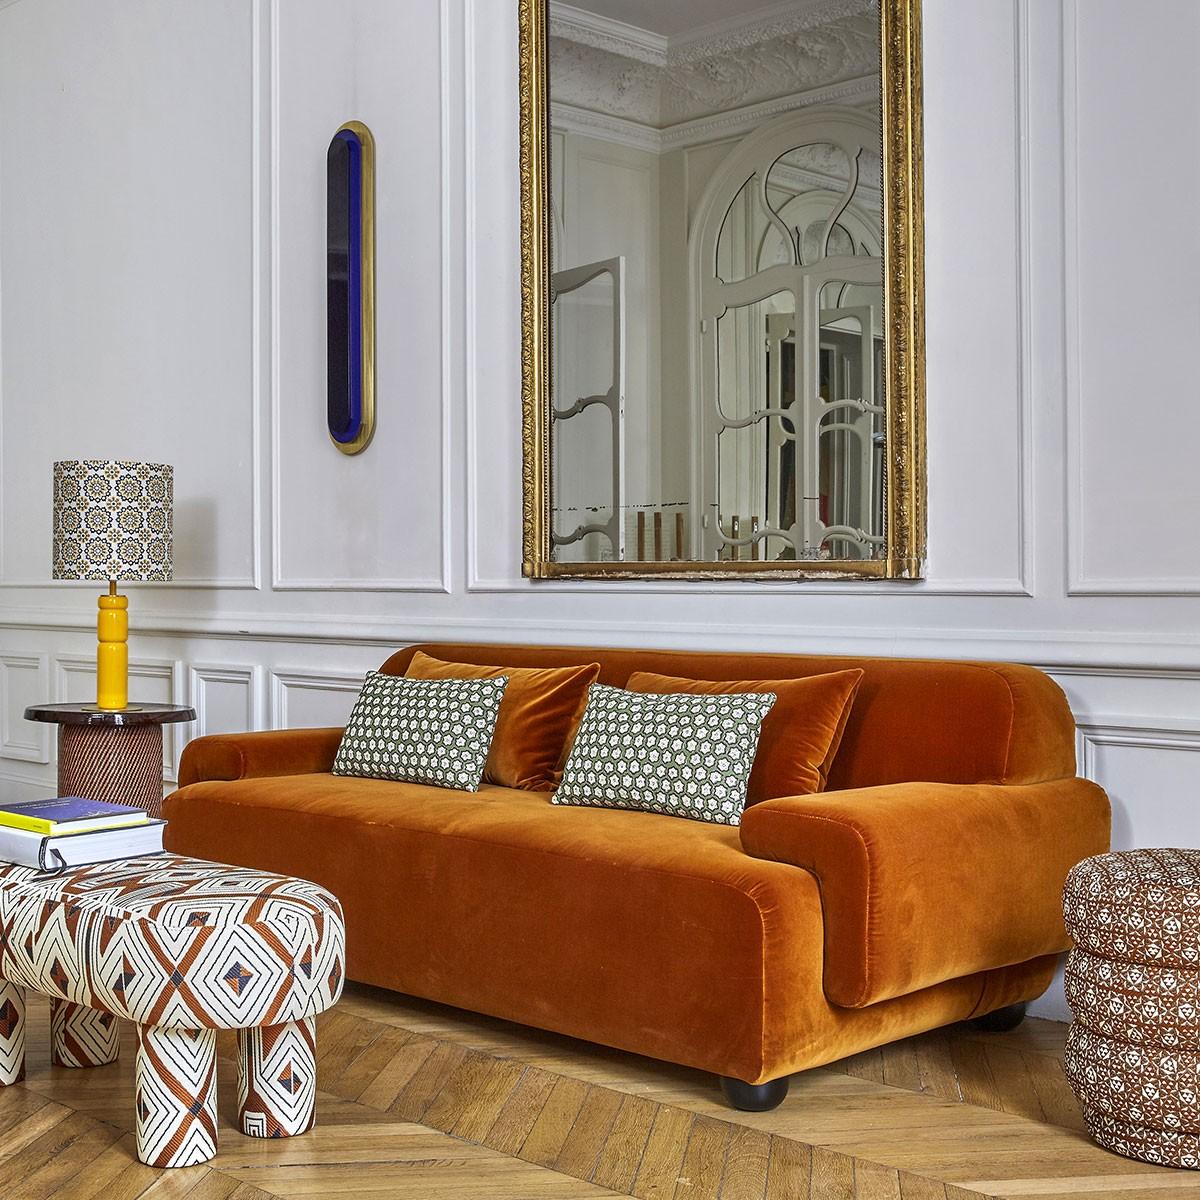 Popus Editions Lena 4 seater sofa in corn Megeve fabric with a knit effect

It looks like it's straight out of a movie, with its generous curves and wide armrests. It is a real invitation to spend long Sundays with the family, comfortably seated